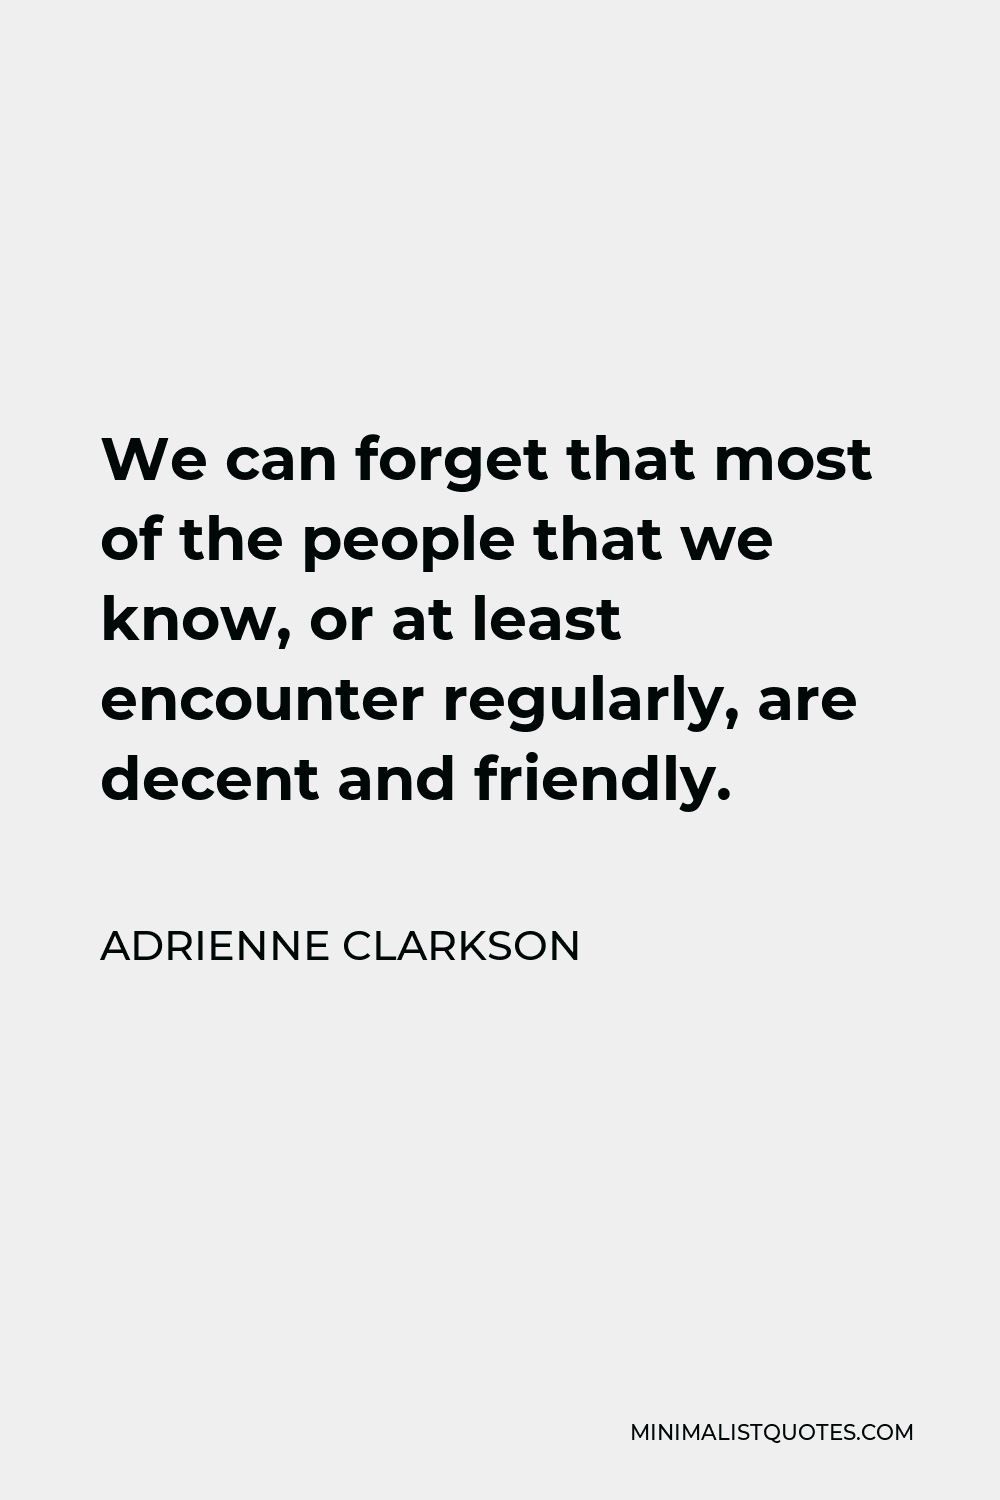 Adrienne Clarkson Quote - We can forget that most of the people that we know, or at least encounter regularly, are decent and friendly.